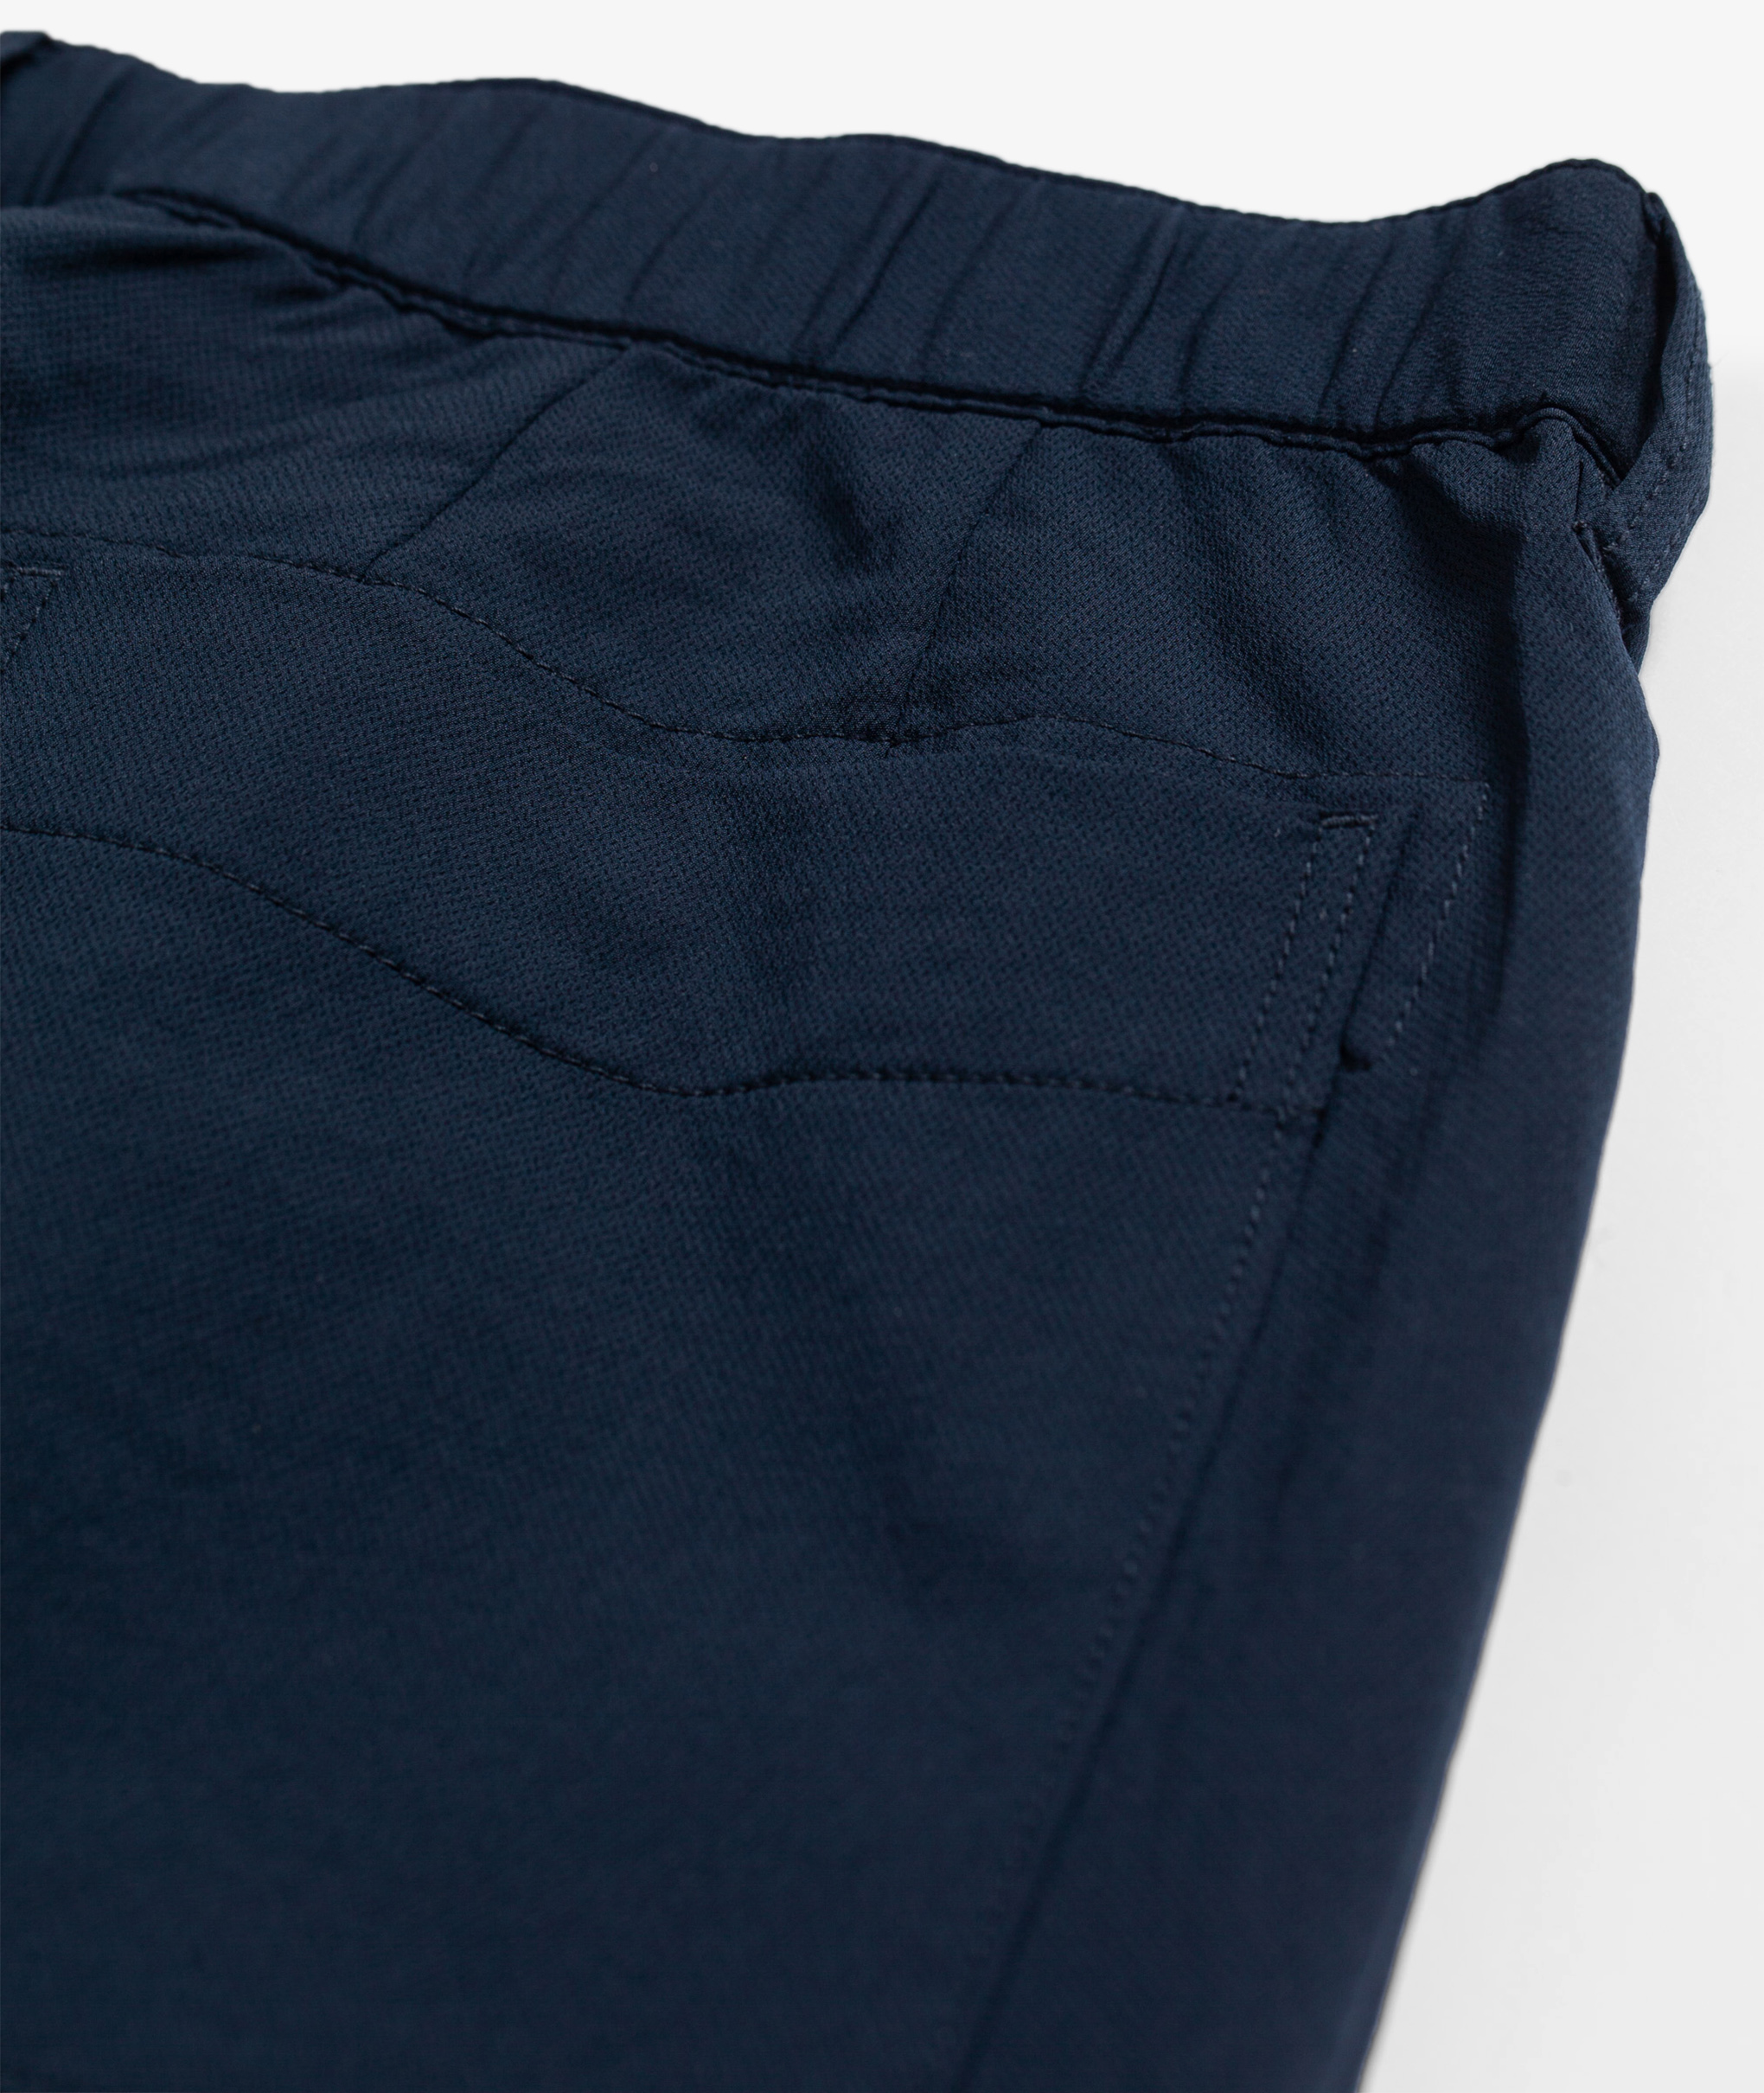 Norse Store | Shipping Worldwide - nanamica Alphadry Wide Pants - Navy